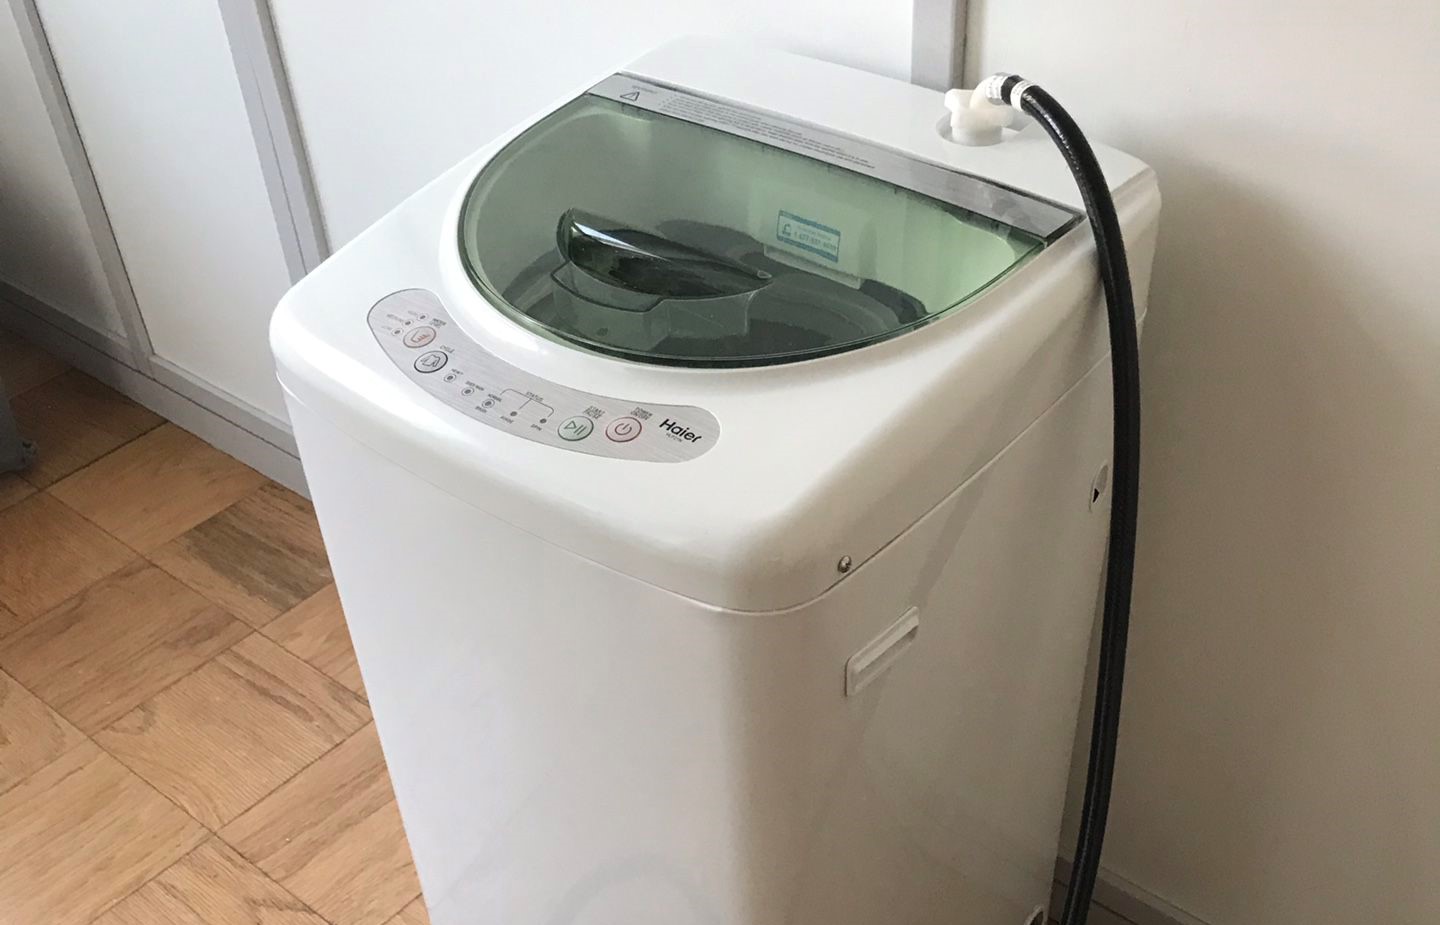 BLACK+DECKER Small Portable Washer, Washing Machine for Household Use,  Portable Washer 1.7 Cu. Ft. with 6 Cycles, LED Display - AliExpress